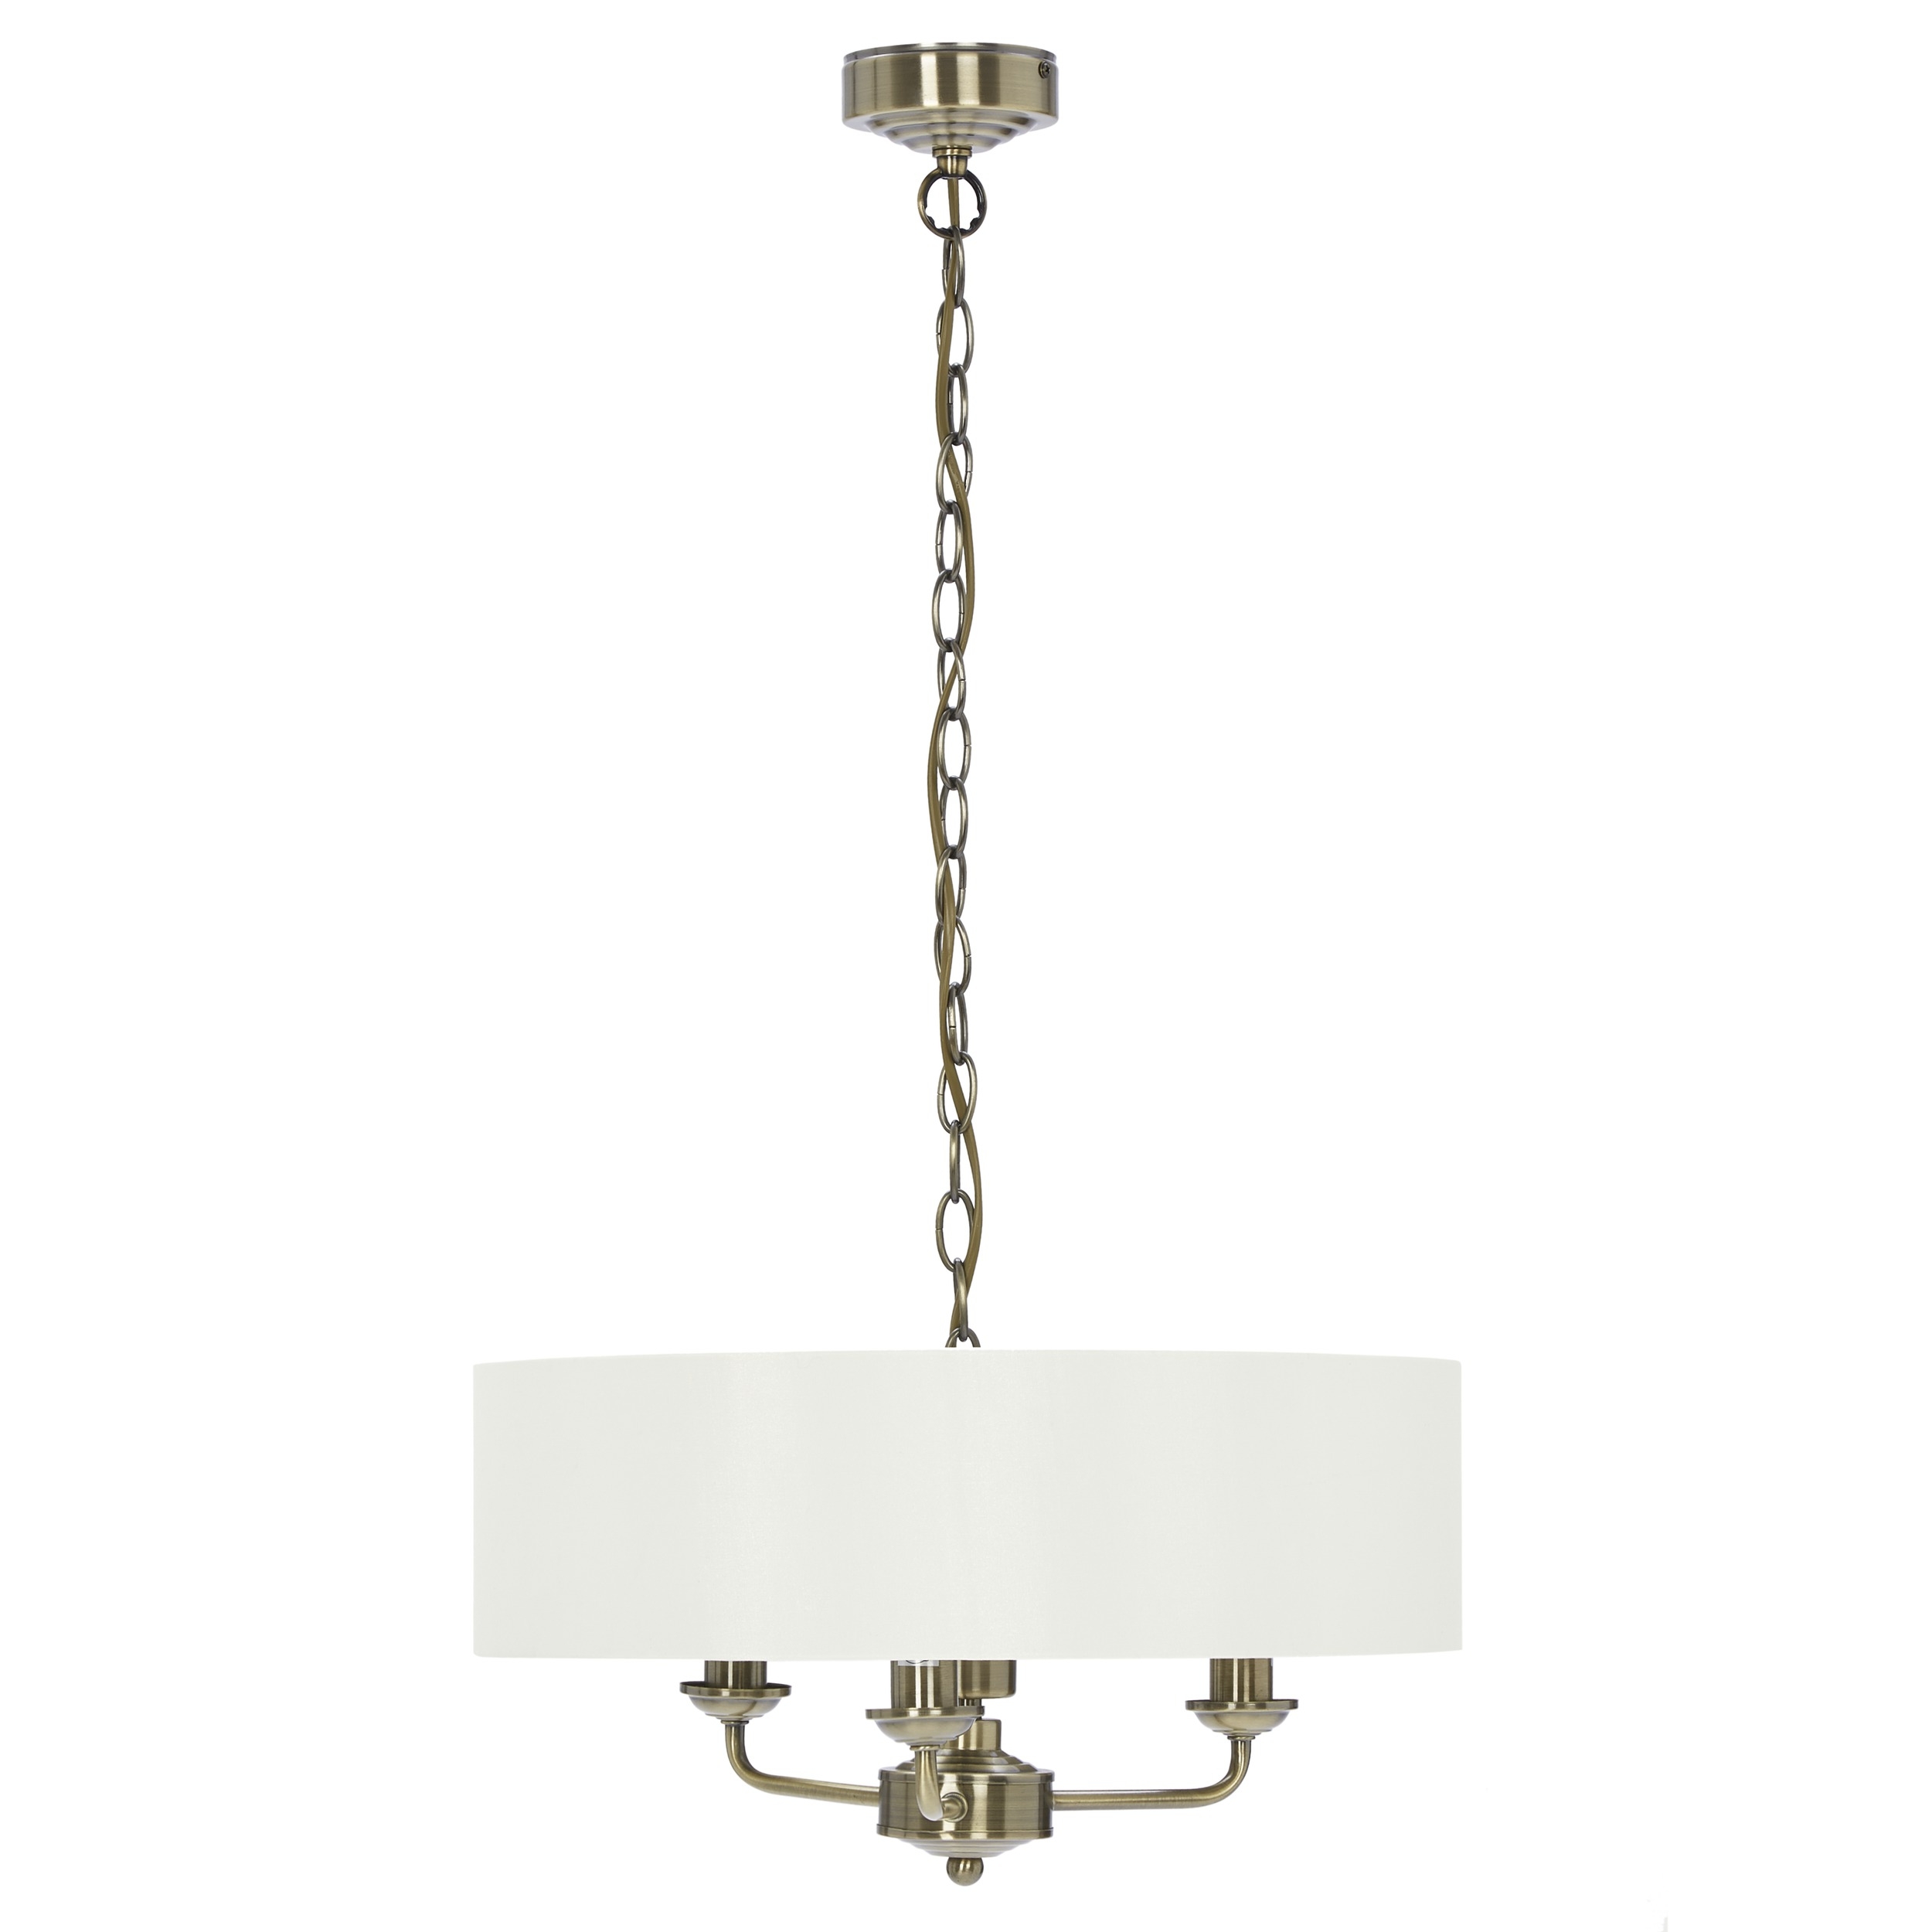 Permalink to 3 Arm Ceiling Light White